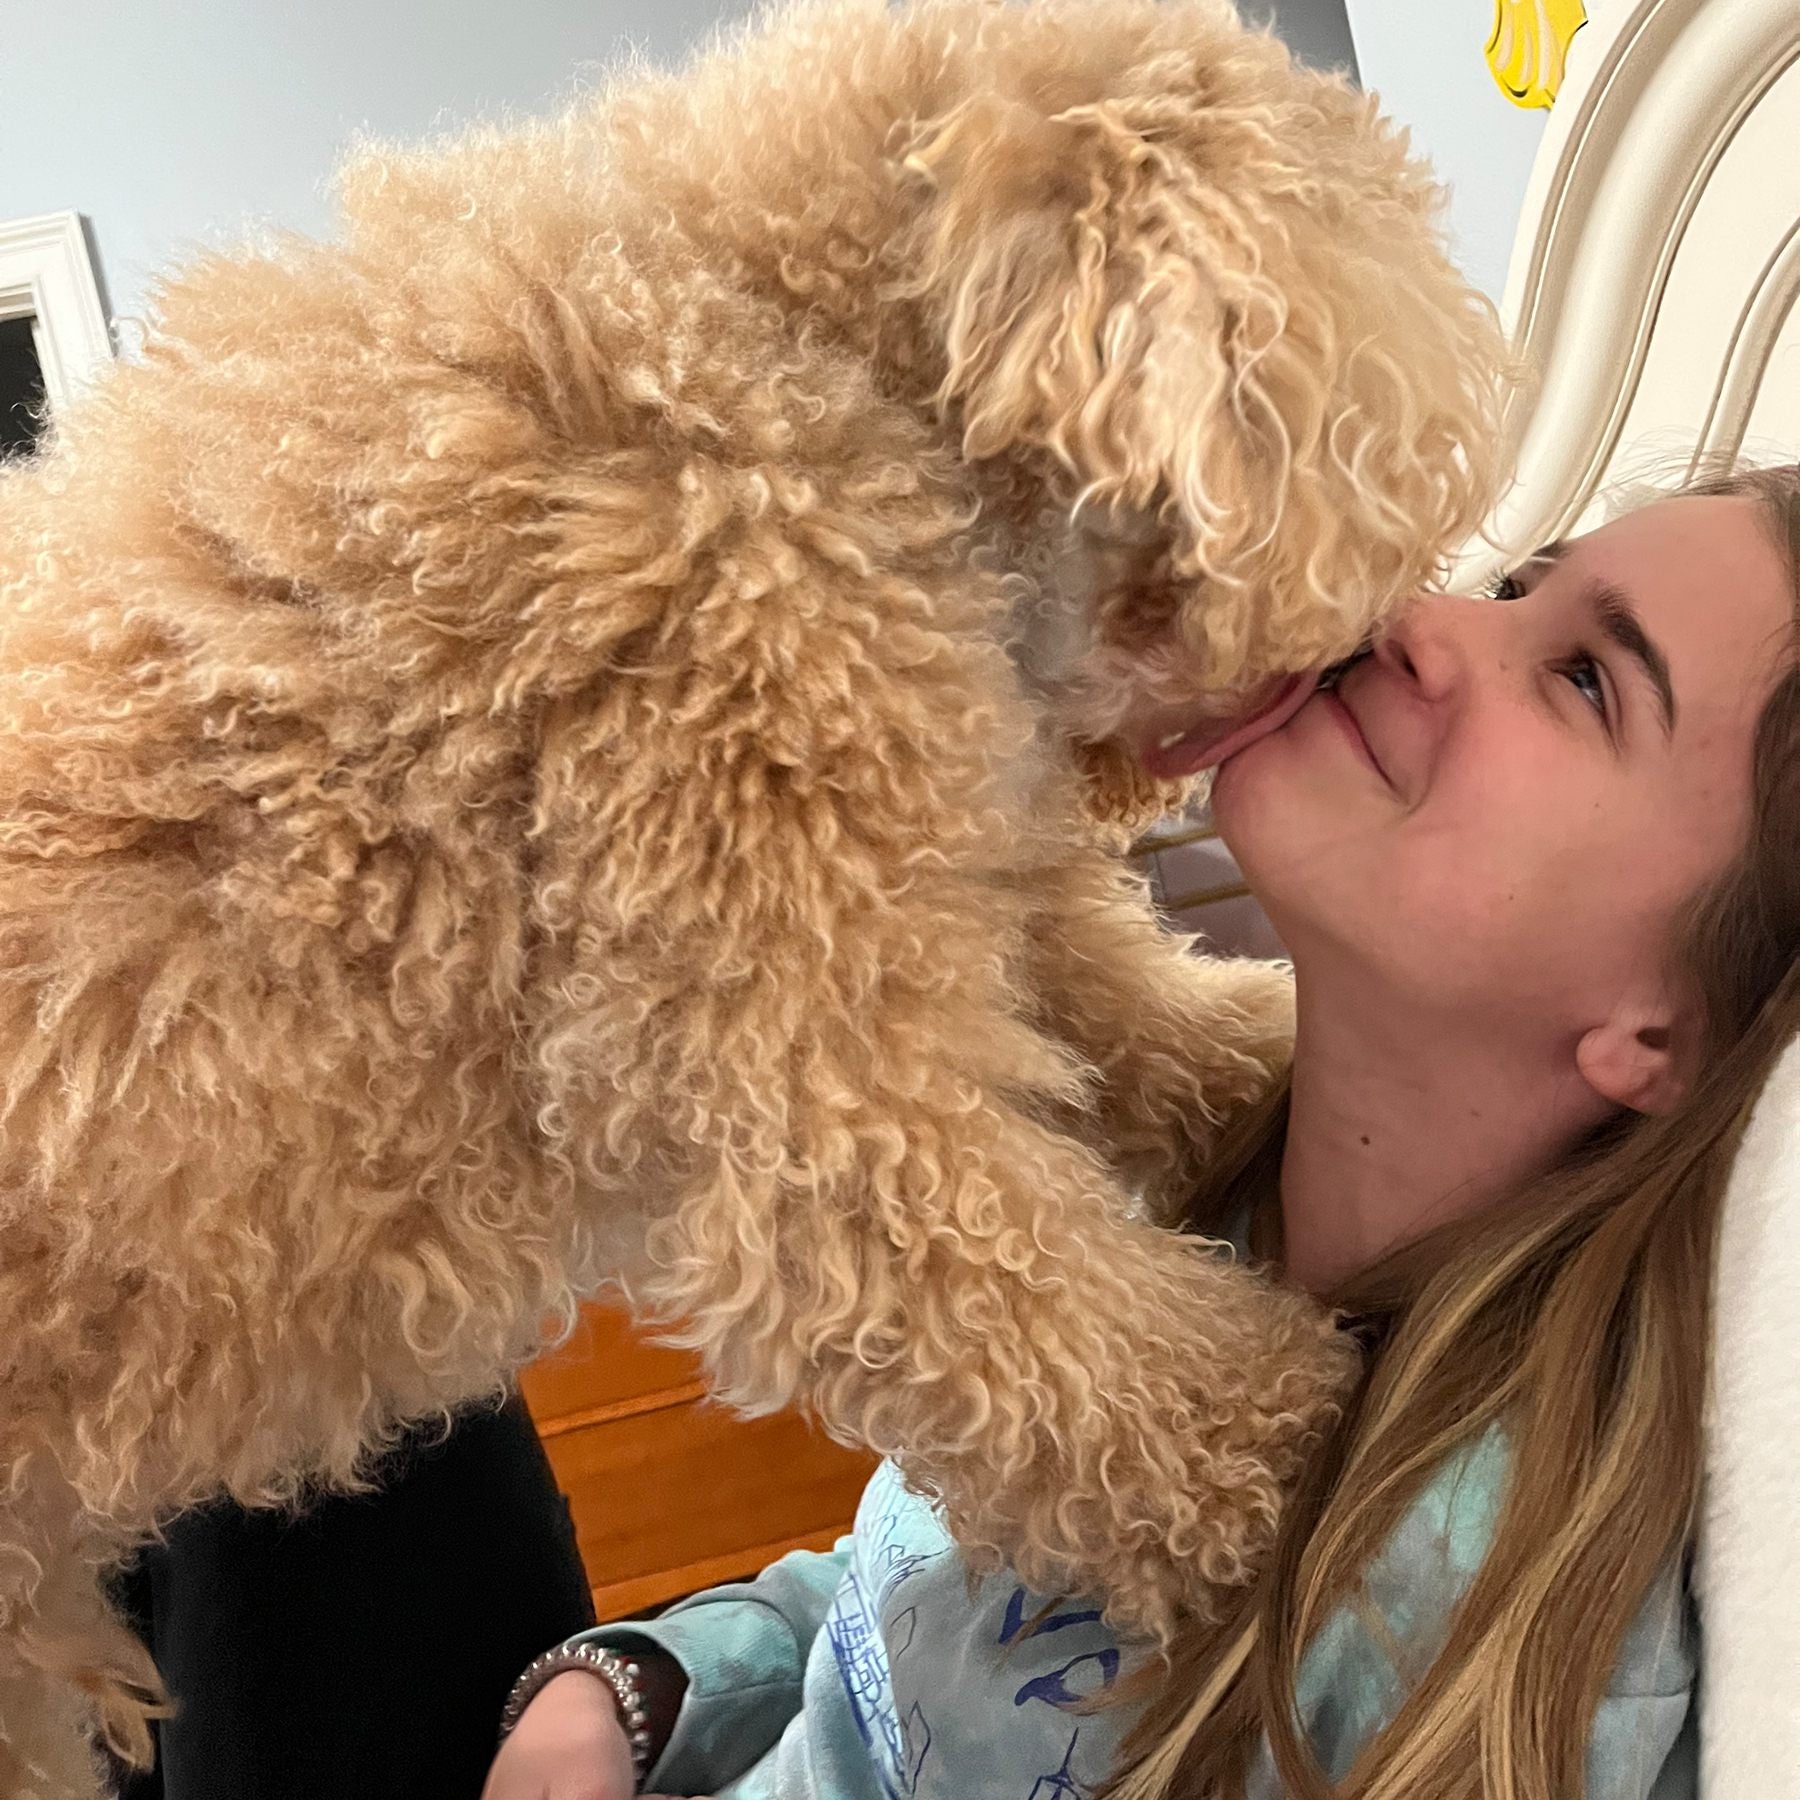 Goldendoodle licking a family member's face in a moment of affection